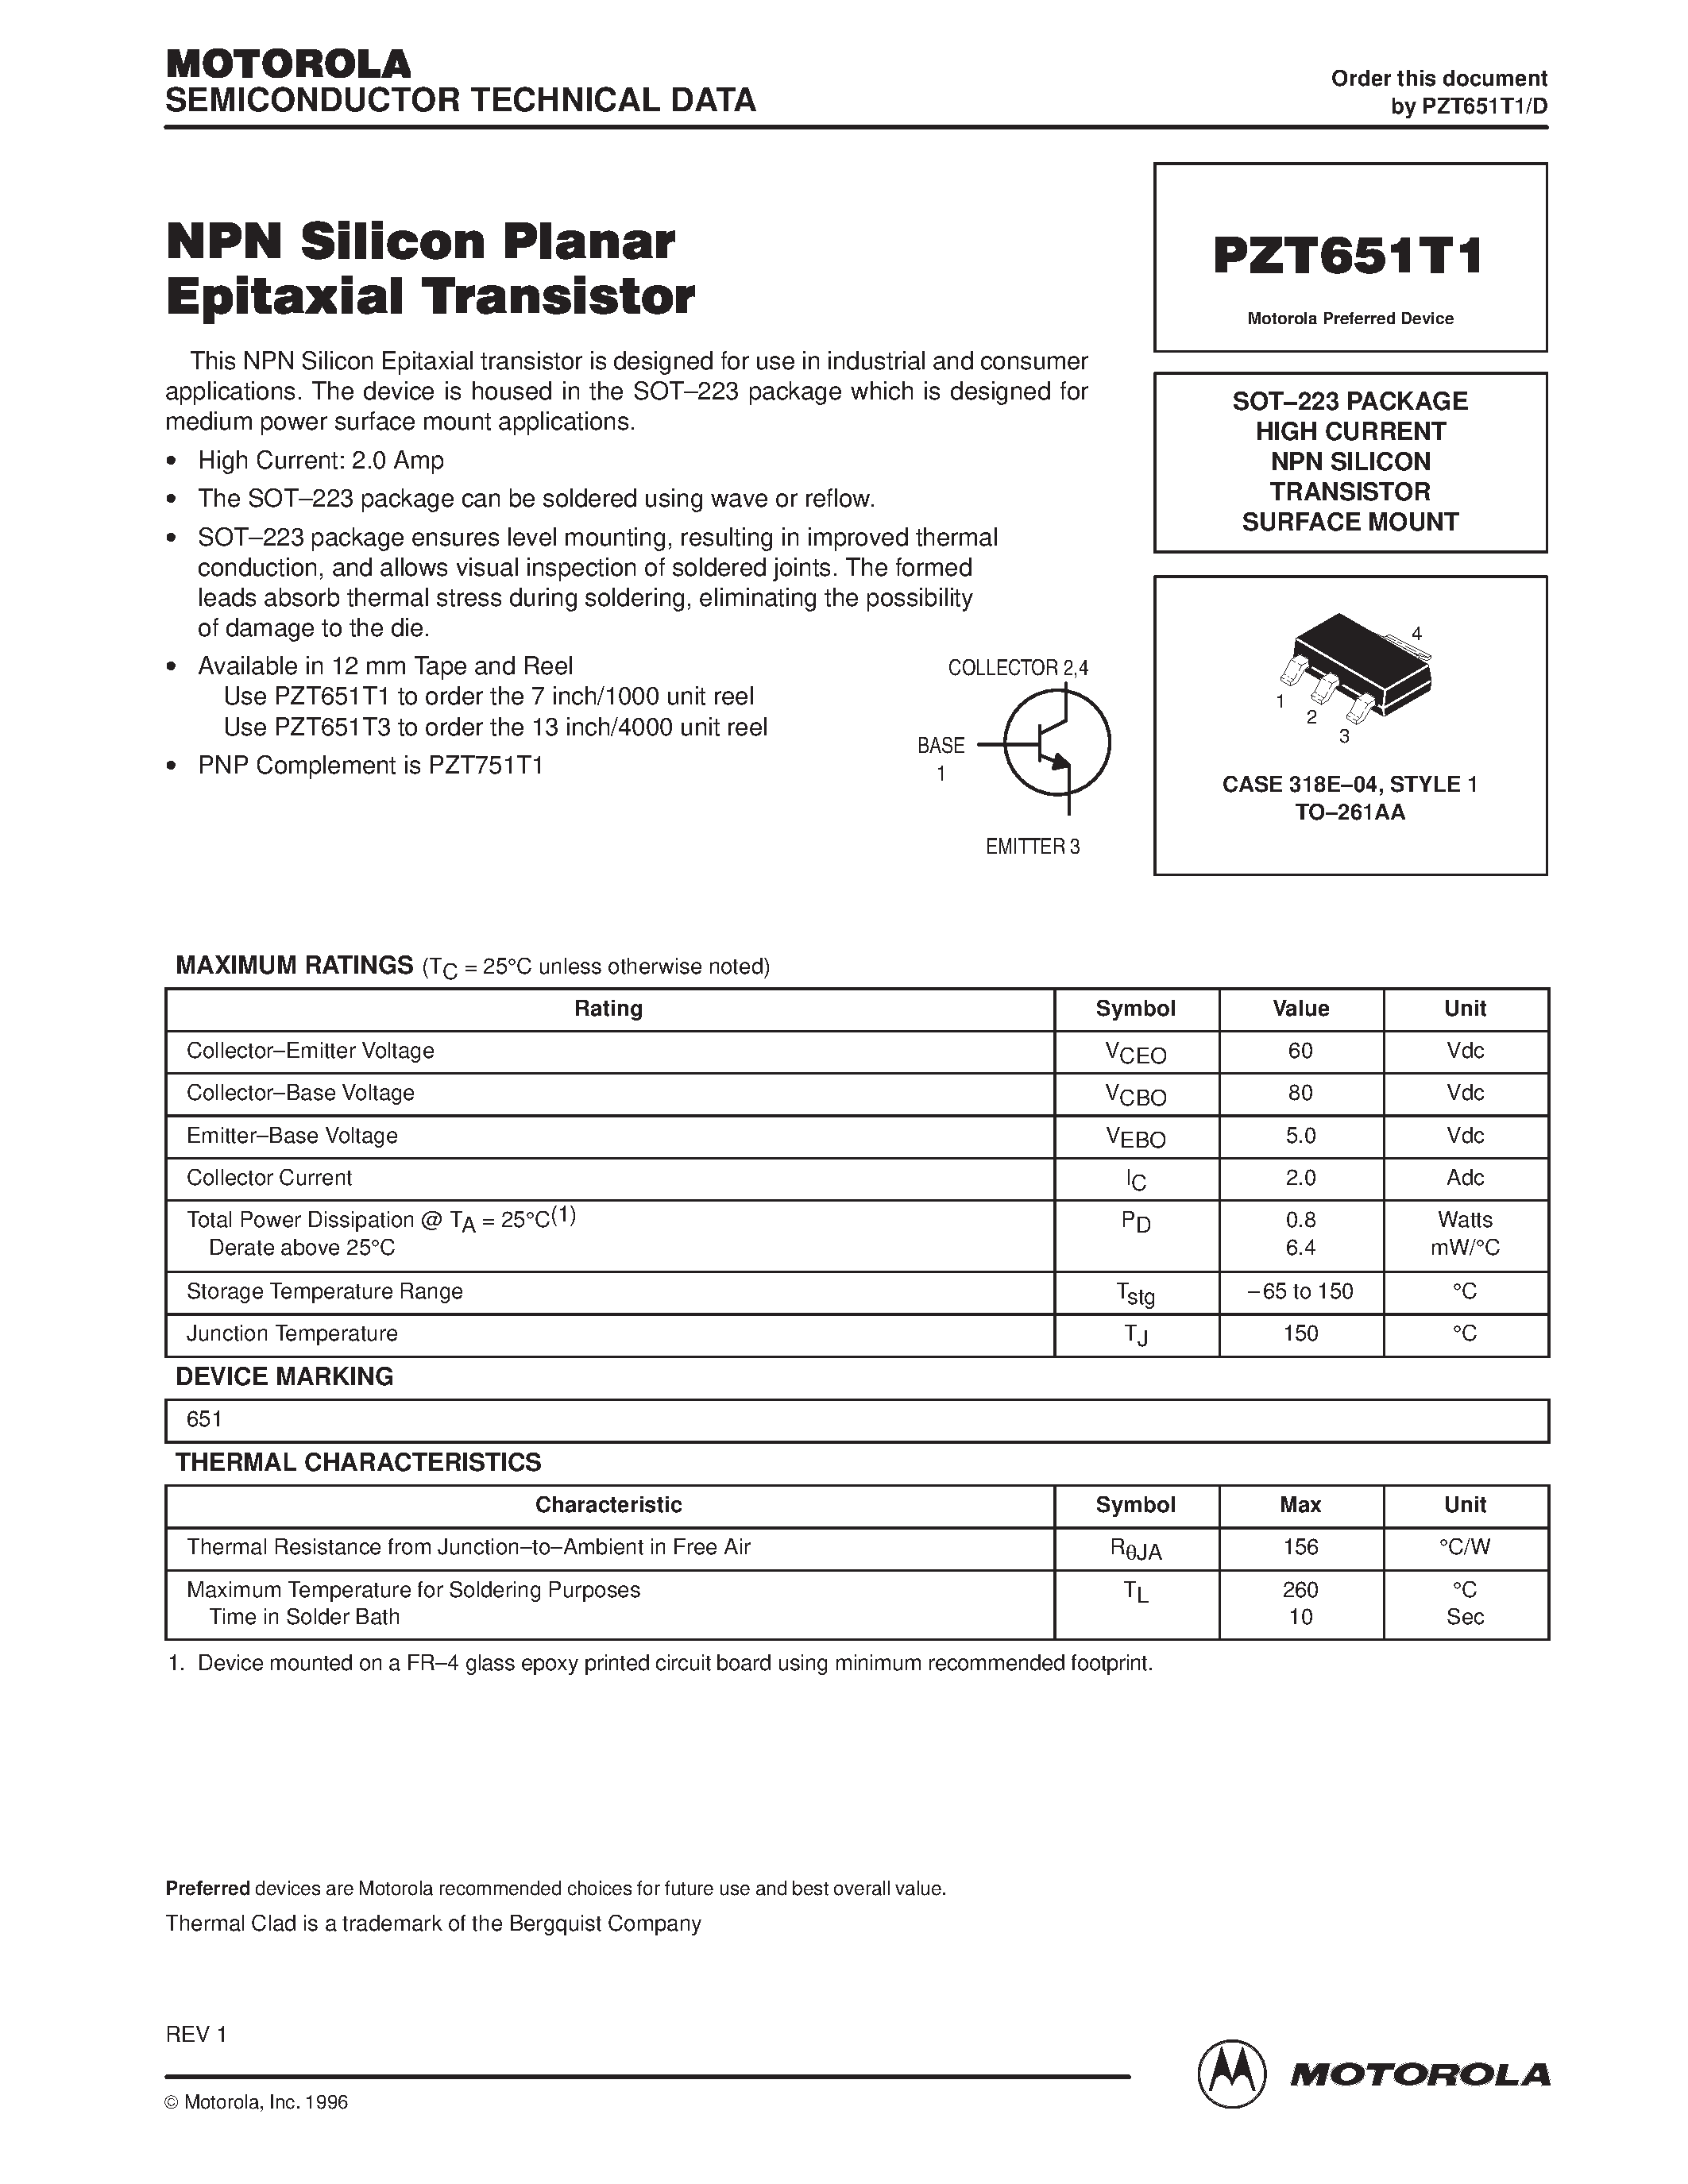 Datasheet PZT651T1 - HIGH CURRENT NPN SILICON TRANSISTOR SURFACE MOUNT page 1